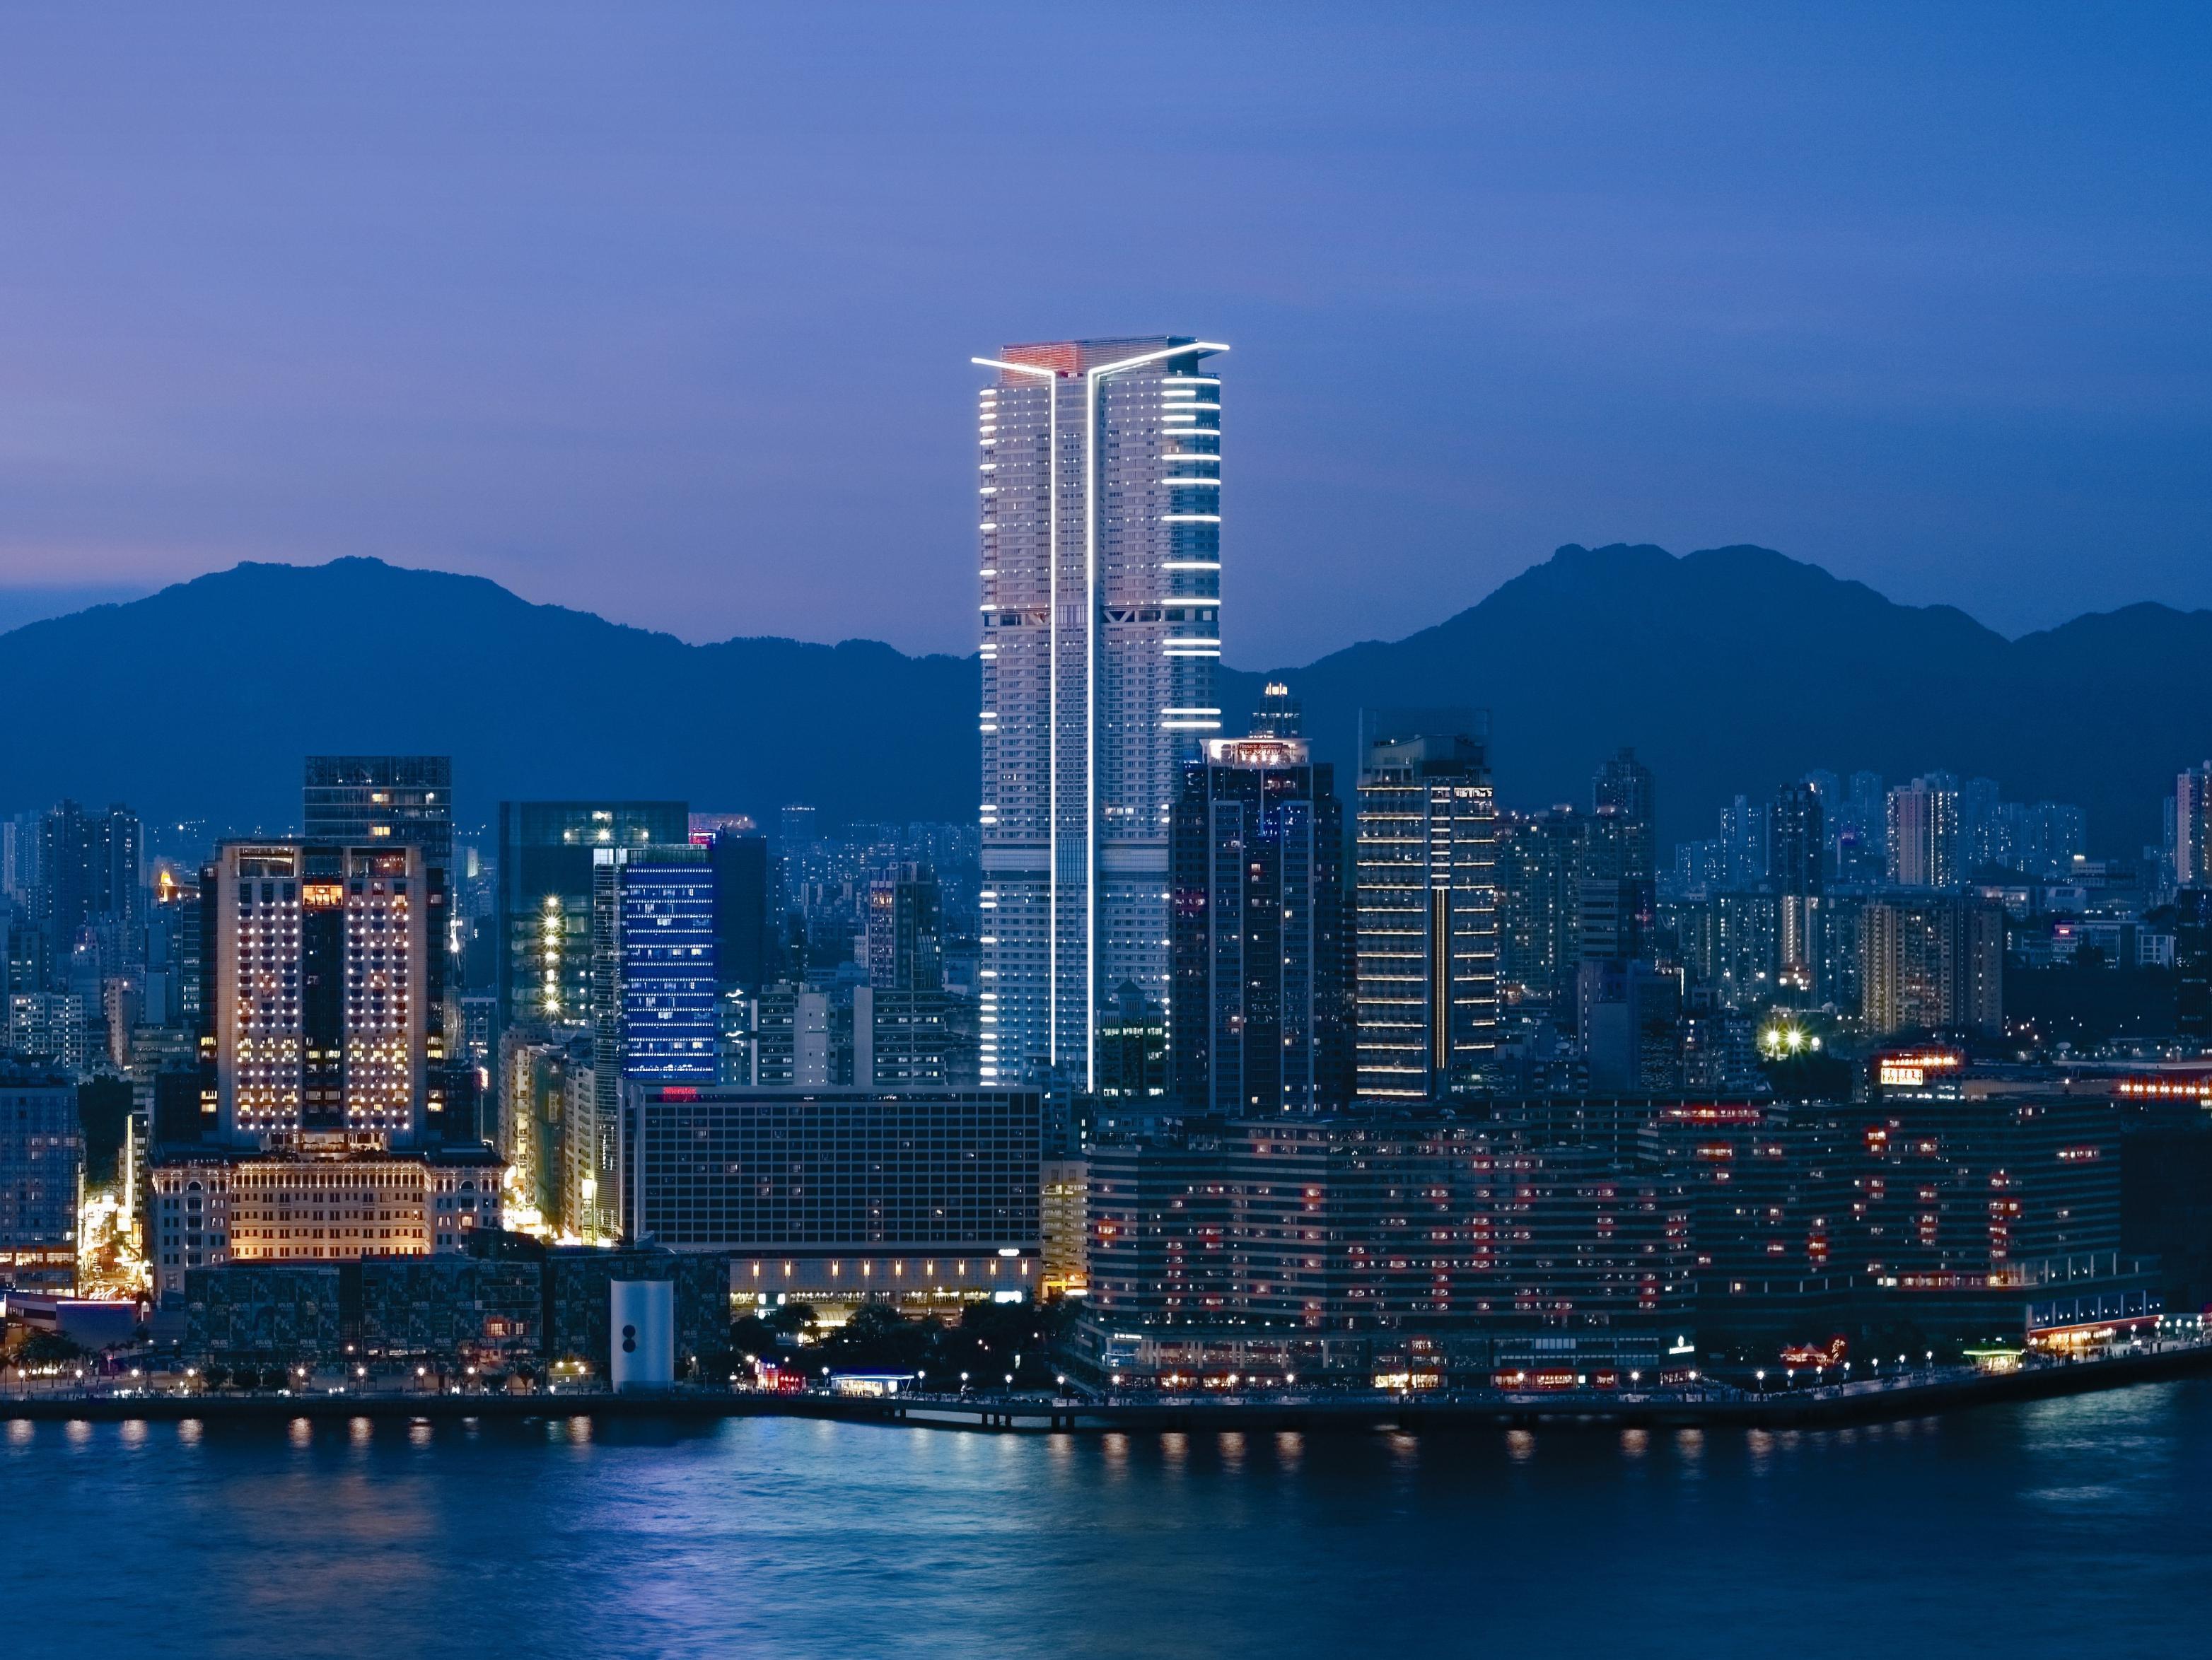 Hyatt Regency Tsim Sha Tsui Hotel Hong Kong FAQ 2016, What facilities are there in Hyatt Regency Tsim Sha Tsui Hotel Hong Kong 2016, What Languages Spoken are Supported in Hyatt Regency Tsim Sha Tsui Hotel Hong Kong 2016, Which payment cards are accepted in Hyatt Regency Tsim Sha Tsui Hotel Hong Kong , Hong Kong Hyatt Regency Tsim Sha Tsui Hotel room facilities and services Q&A 2016, Hong Kong Hyatt Regency Tsim Sha Tsui Hotel online booking services 2016, Hong Kong Hyatt Regency Tsim Sha Tsui Hotel address 2016, Hong Kong Hyatt Regency Tsim Sha Tsui Hotel telephone number 2016,Hong Kong Hyatt Regency Tsim Sha Tsui Hotel map 2016, Hong Kong Hyatt Regency Tsim Sha Tsui Hotel traffic guide 2016, how to go Hong Kong Hyatt Regency Tsim Sha Tsui Hotel, Hong Kong Hyatt Regency Tsim Sha Tsui Hotel booking online 2016, Hong Kong Hyatt Regency Tsim Sha Tsui Hotel room types 2016.